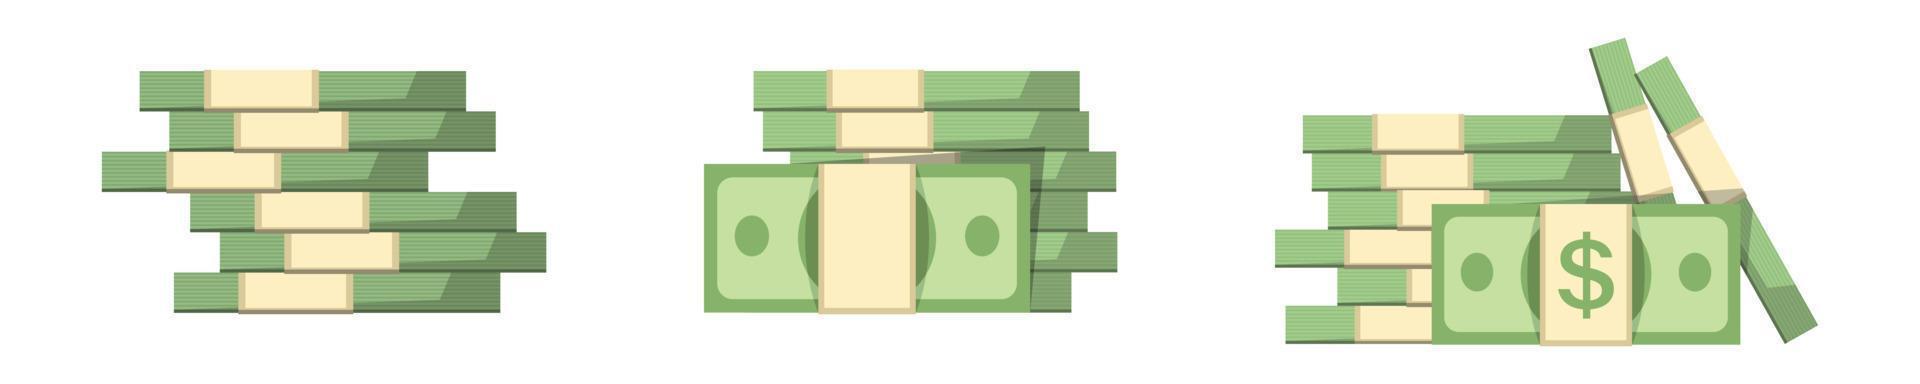 Paper bills icon in flat style. Stack of currency banknotes vector illustration on isolated background. Green dollars sign business concept.